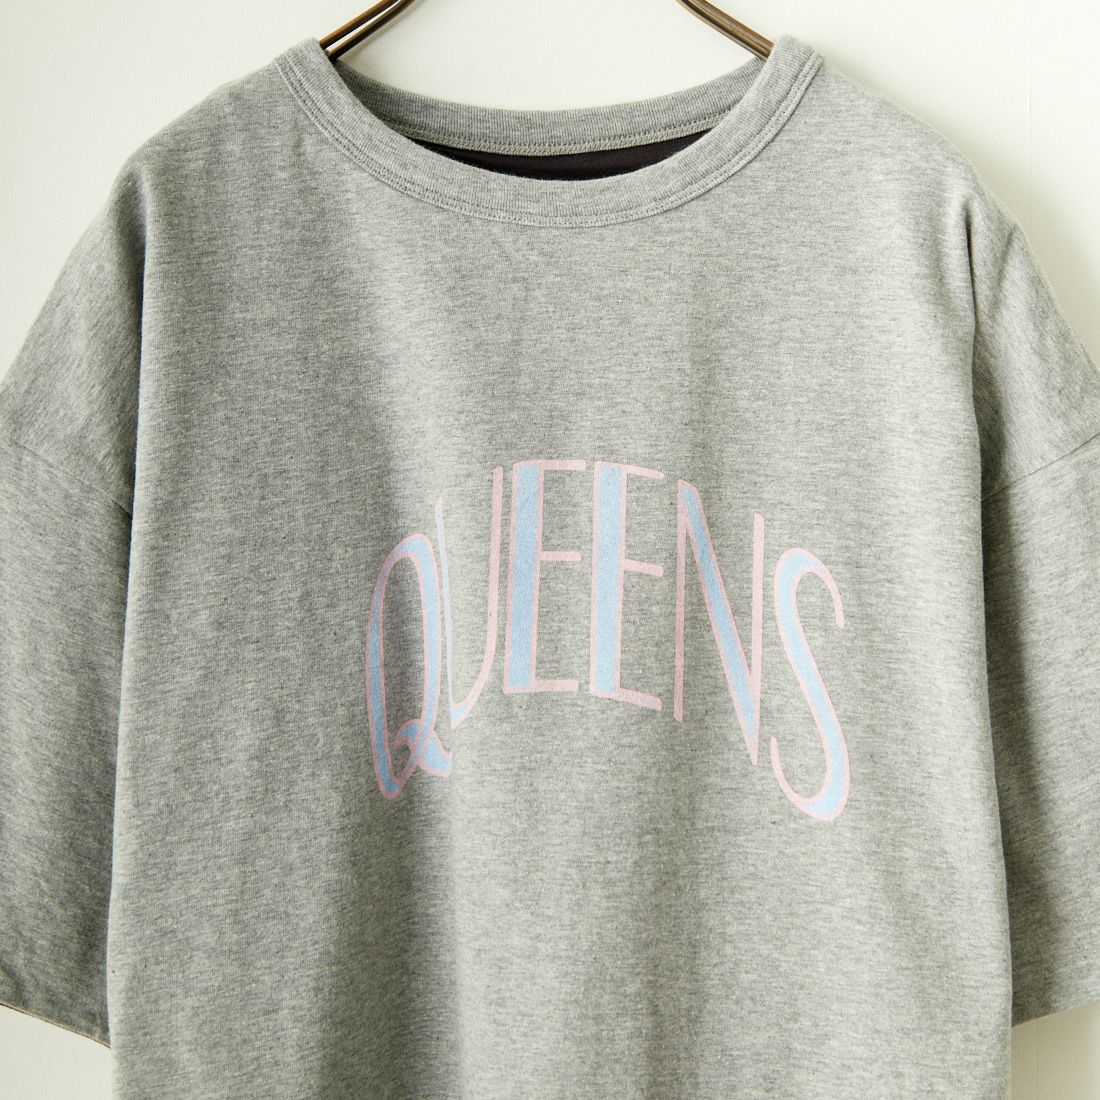 St.Johns 3rd club [セントジョンズサードクラブ] QUEEN Tシャツ [SJ24-02L] GRY/GRY BK